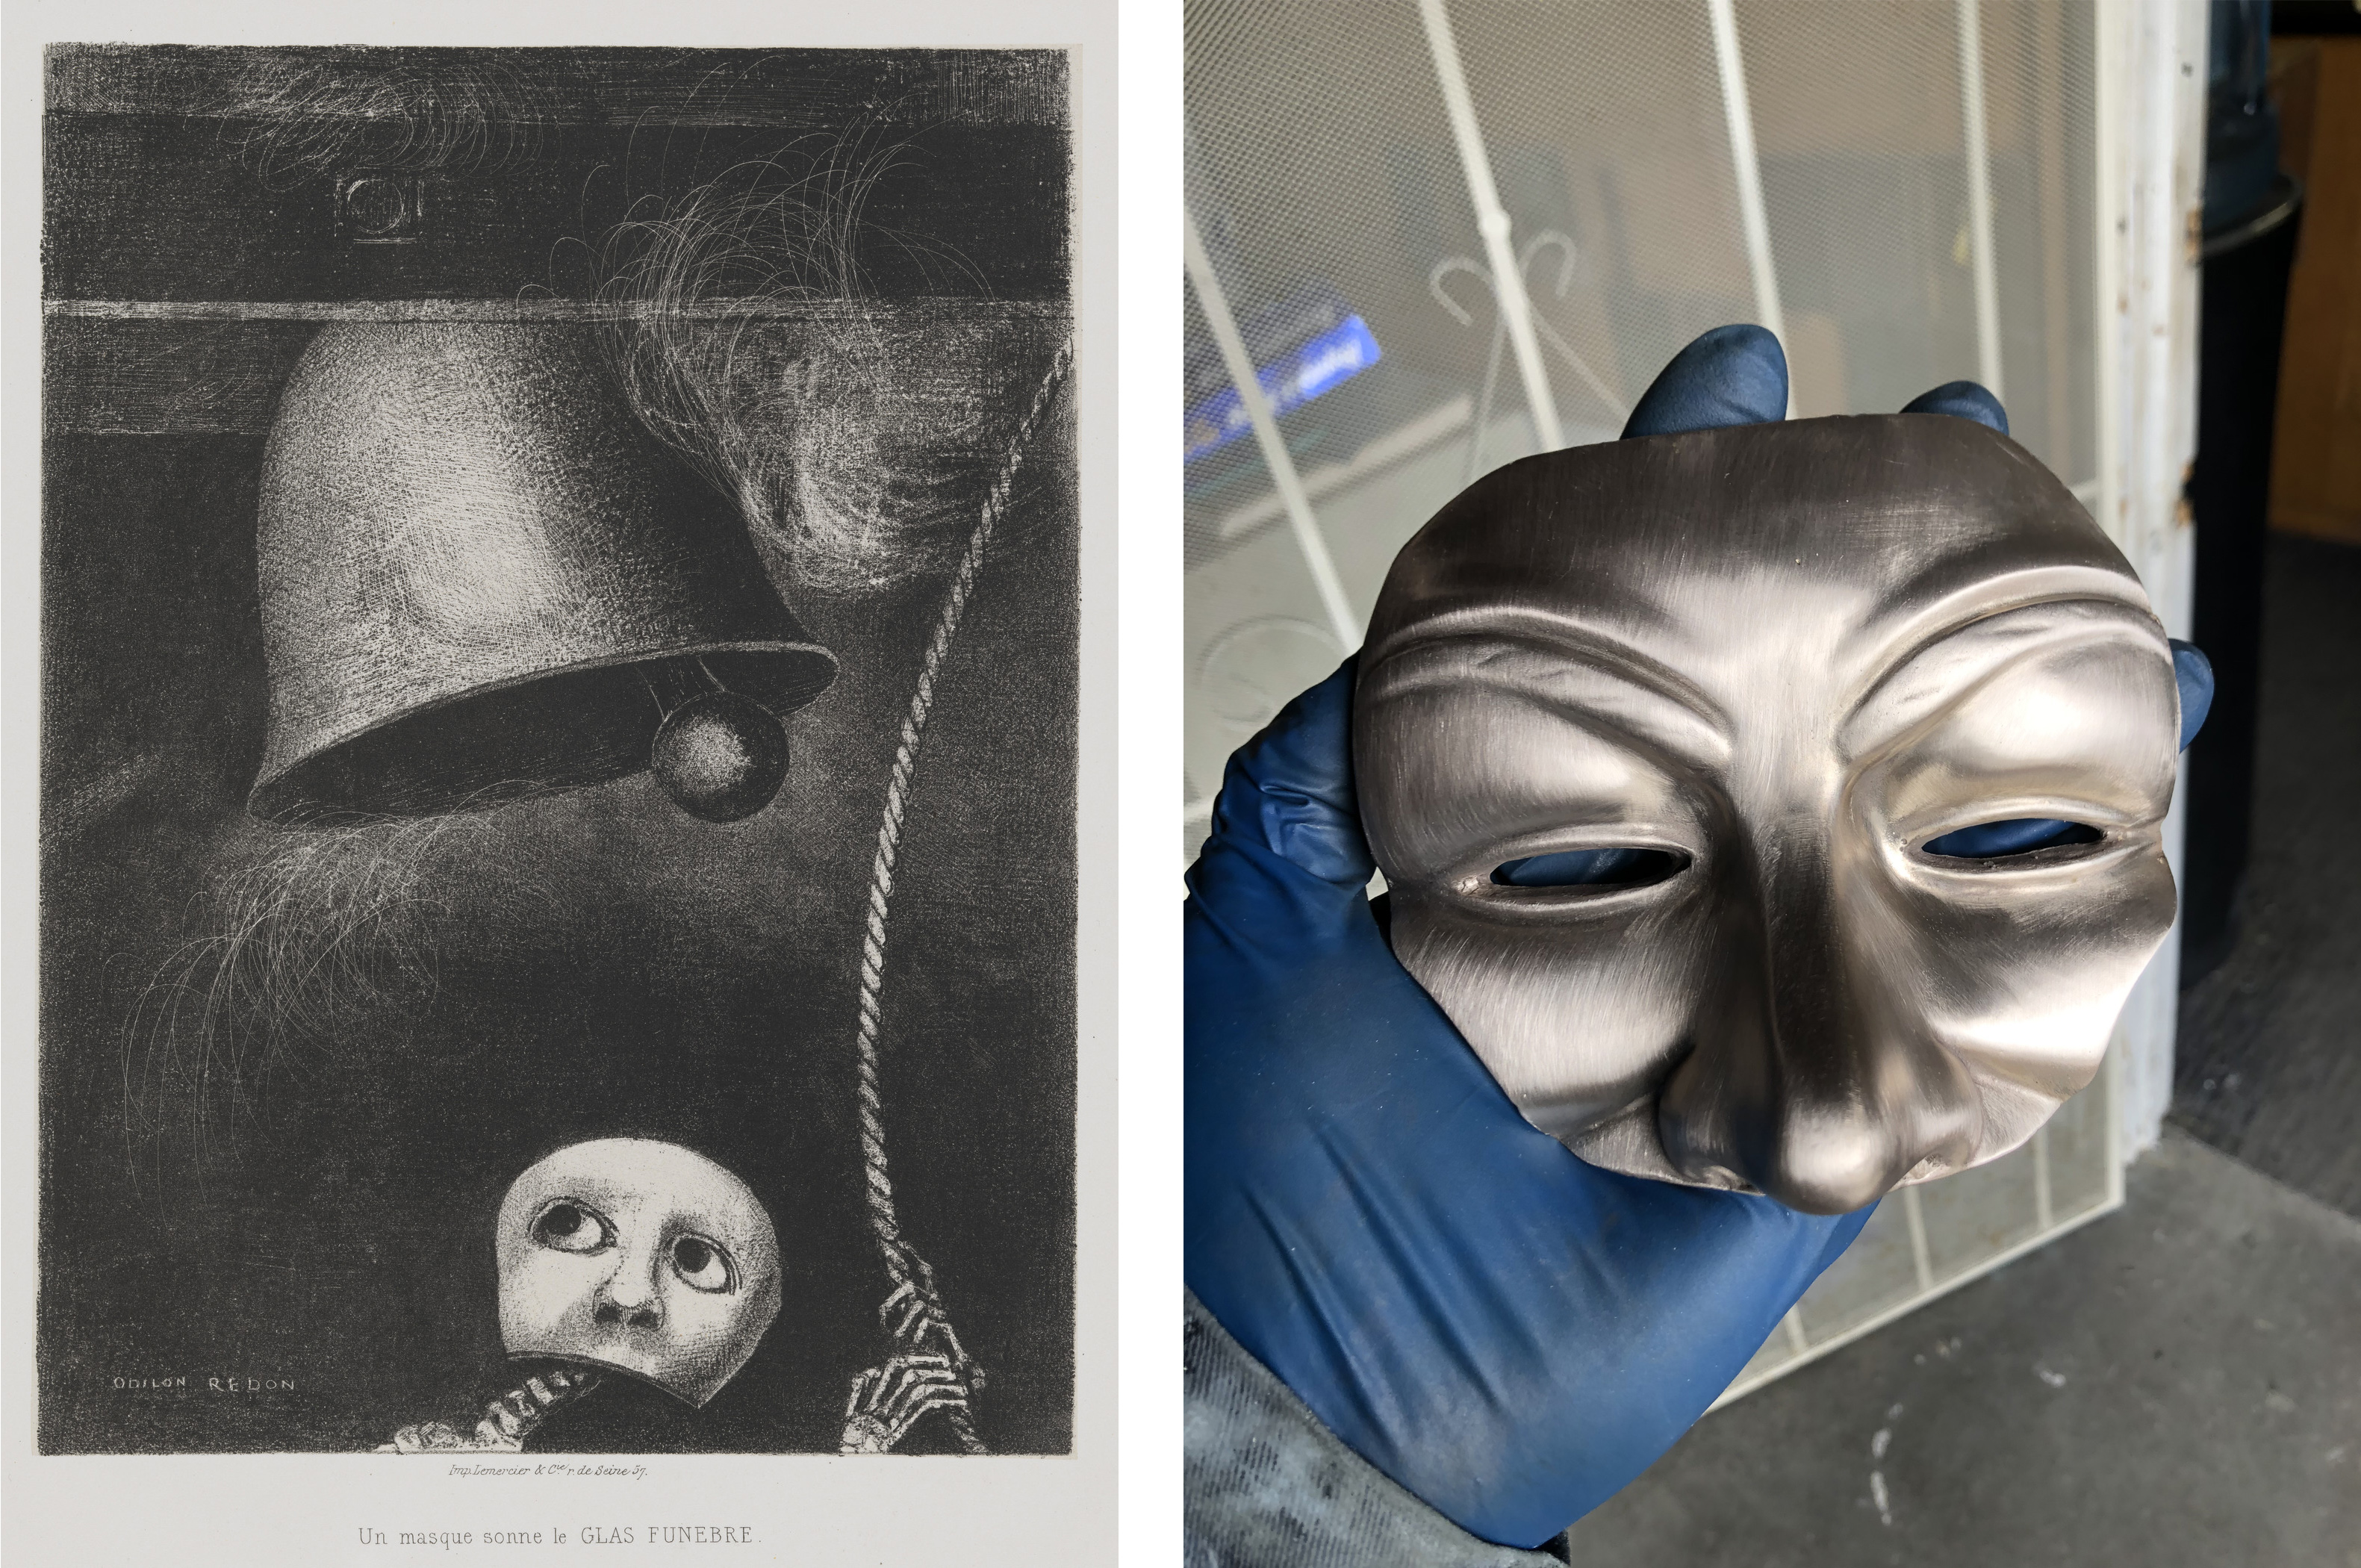 Left (LACMA Selection): Odilon Redon, Un masque sonne le glas funèbre (A Mask Sounds the Death Knell) from the portfolio À Edgar Poe (To Edgar Poe), 1882, Los Angeles County Museum of Art, Wallis Foundation Fund in memory of Hal B. Wallis, photo © Museum Associates/LACMA; Right (Artist work): Ethan Tate, Untitled, 2020, photo courtesy of the artist